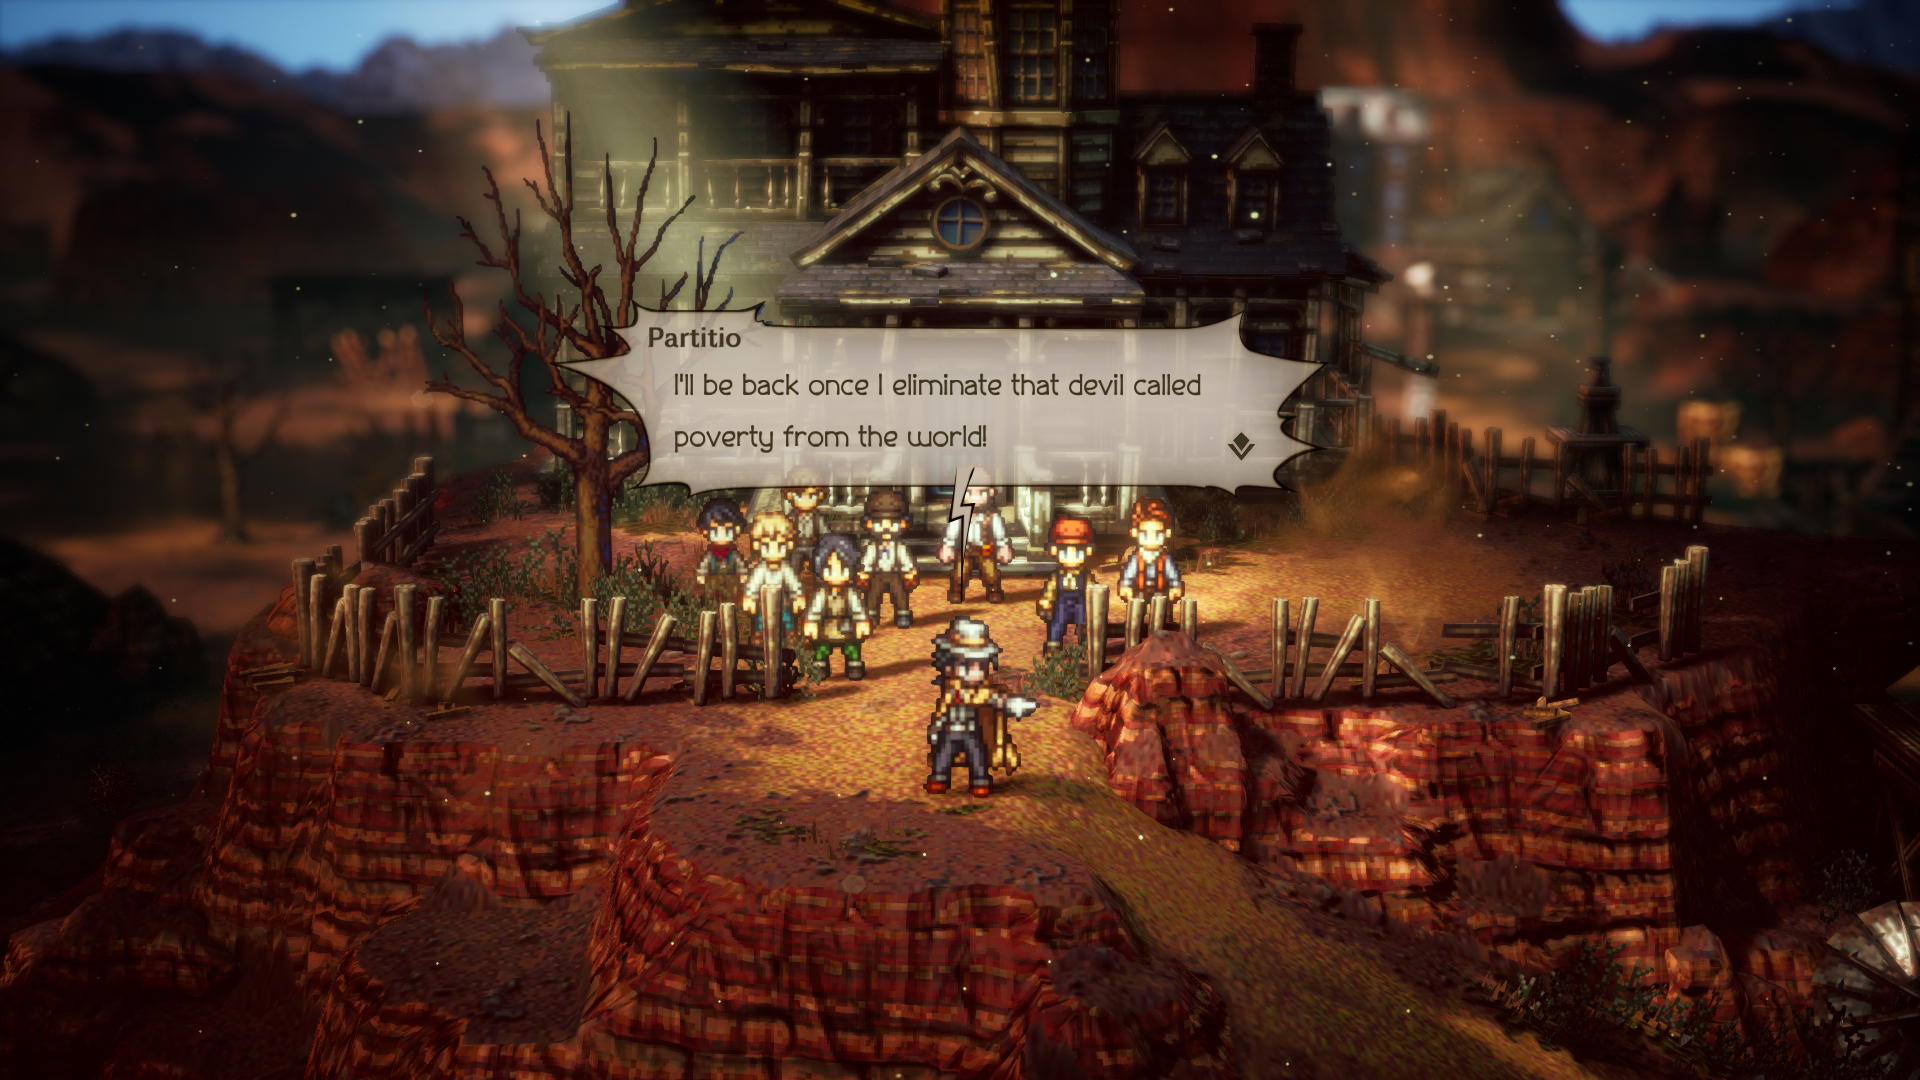 #
      Octopath Traveler II details Partitio the Merchant, Osvald the Scholar, and water travel